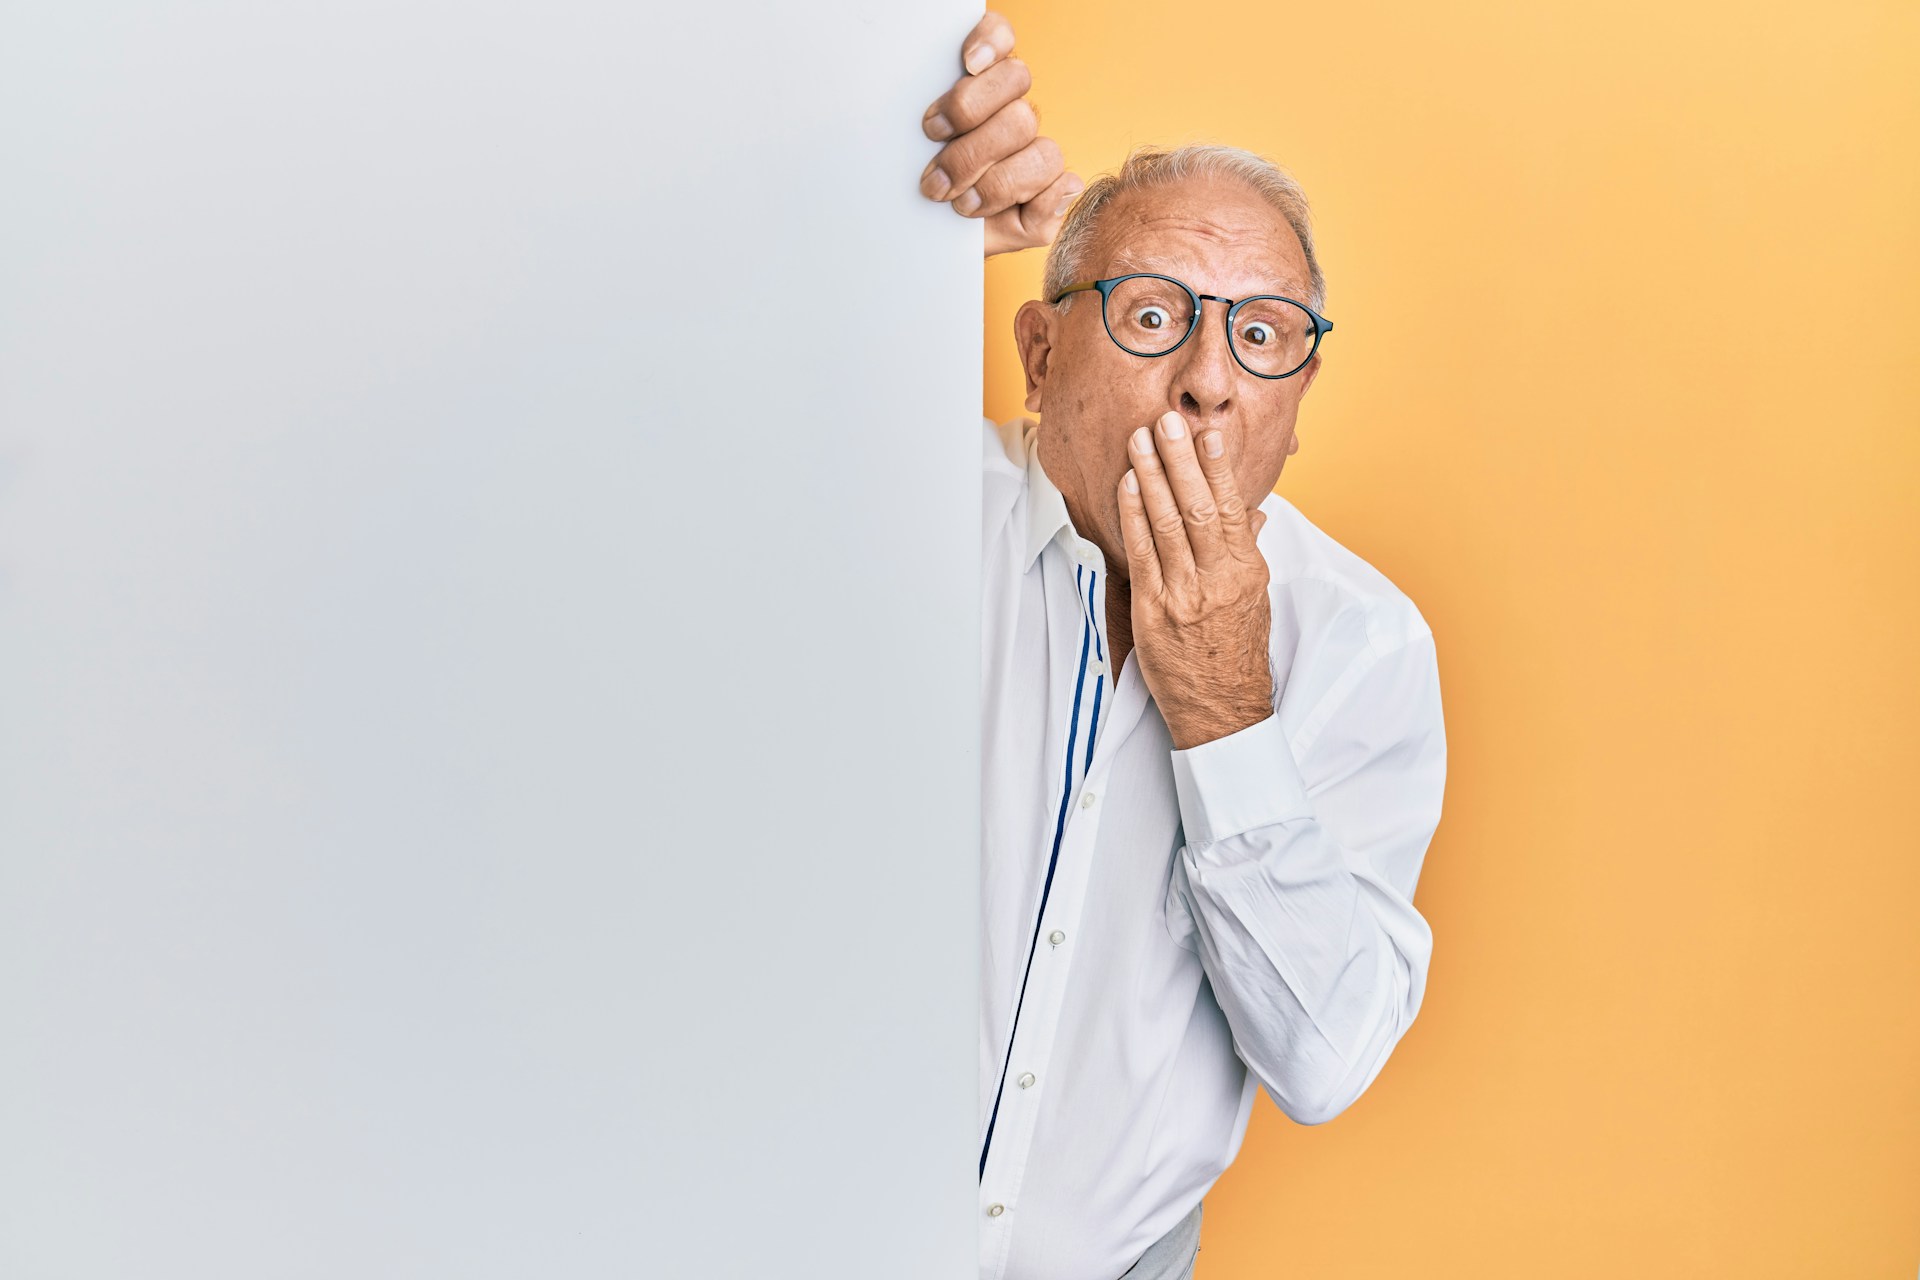 older man peeking around corner and covering mouth in surprise